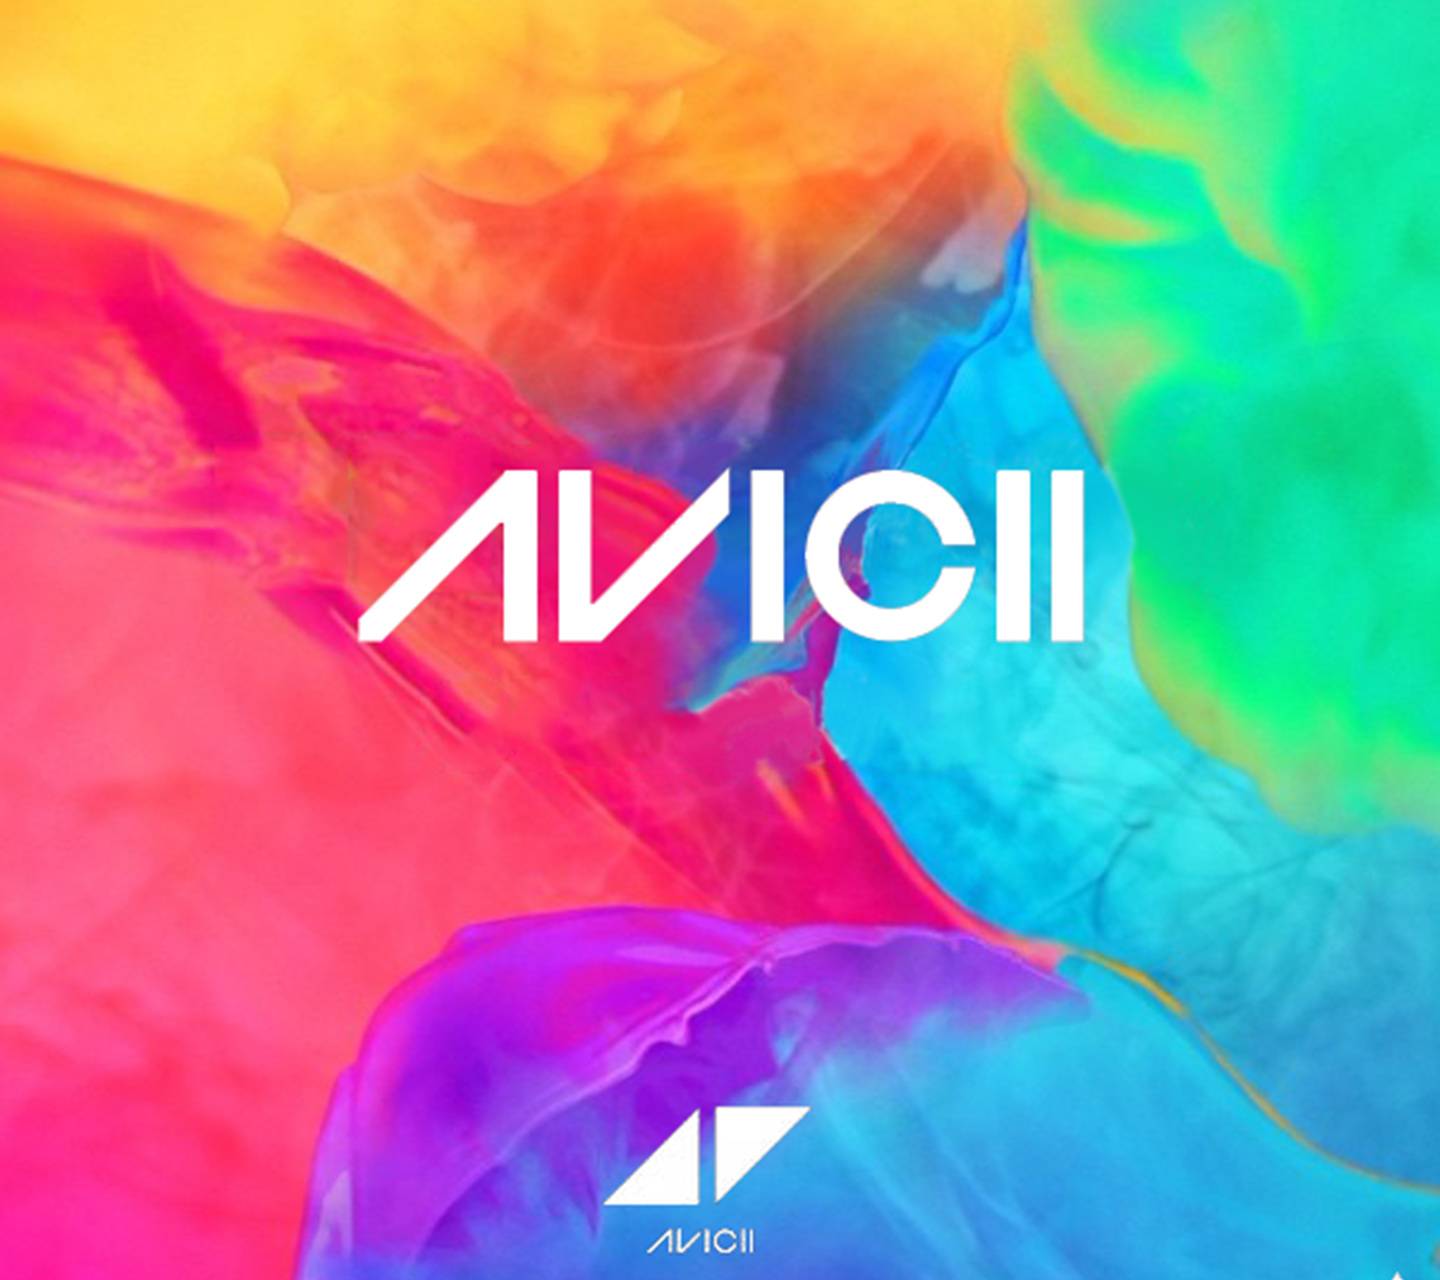 Download free avicii wallpaper for your mobile phone